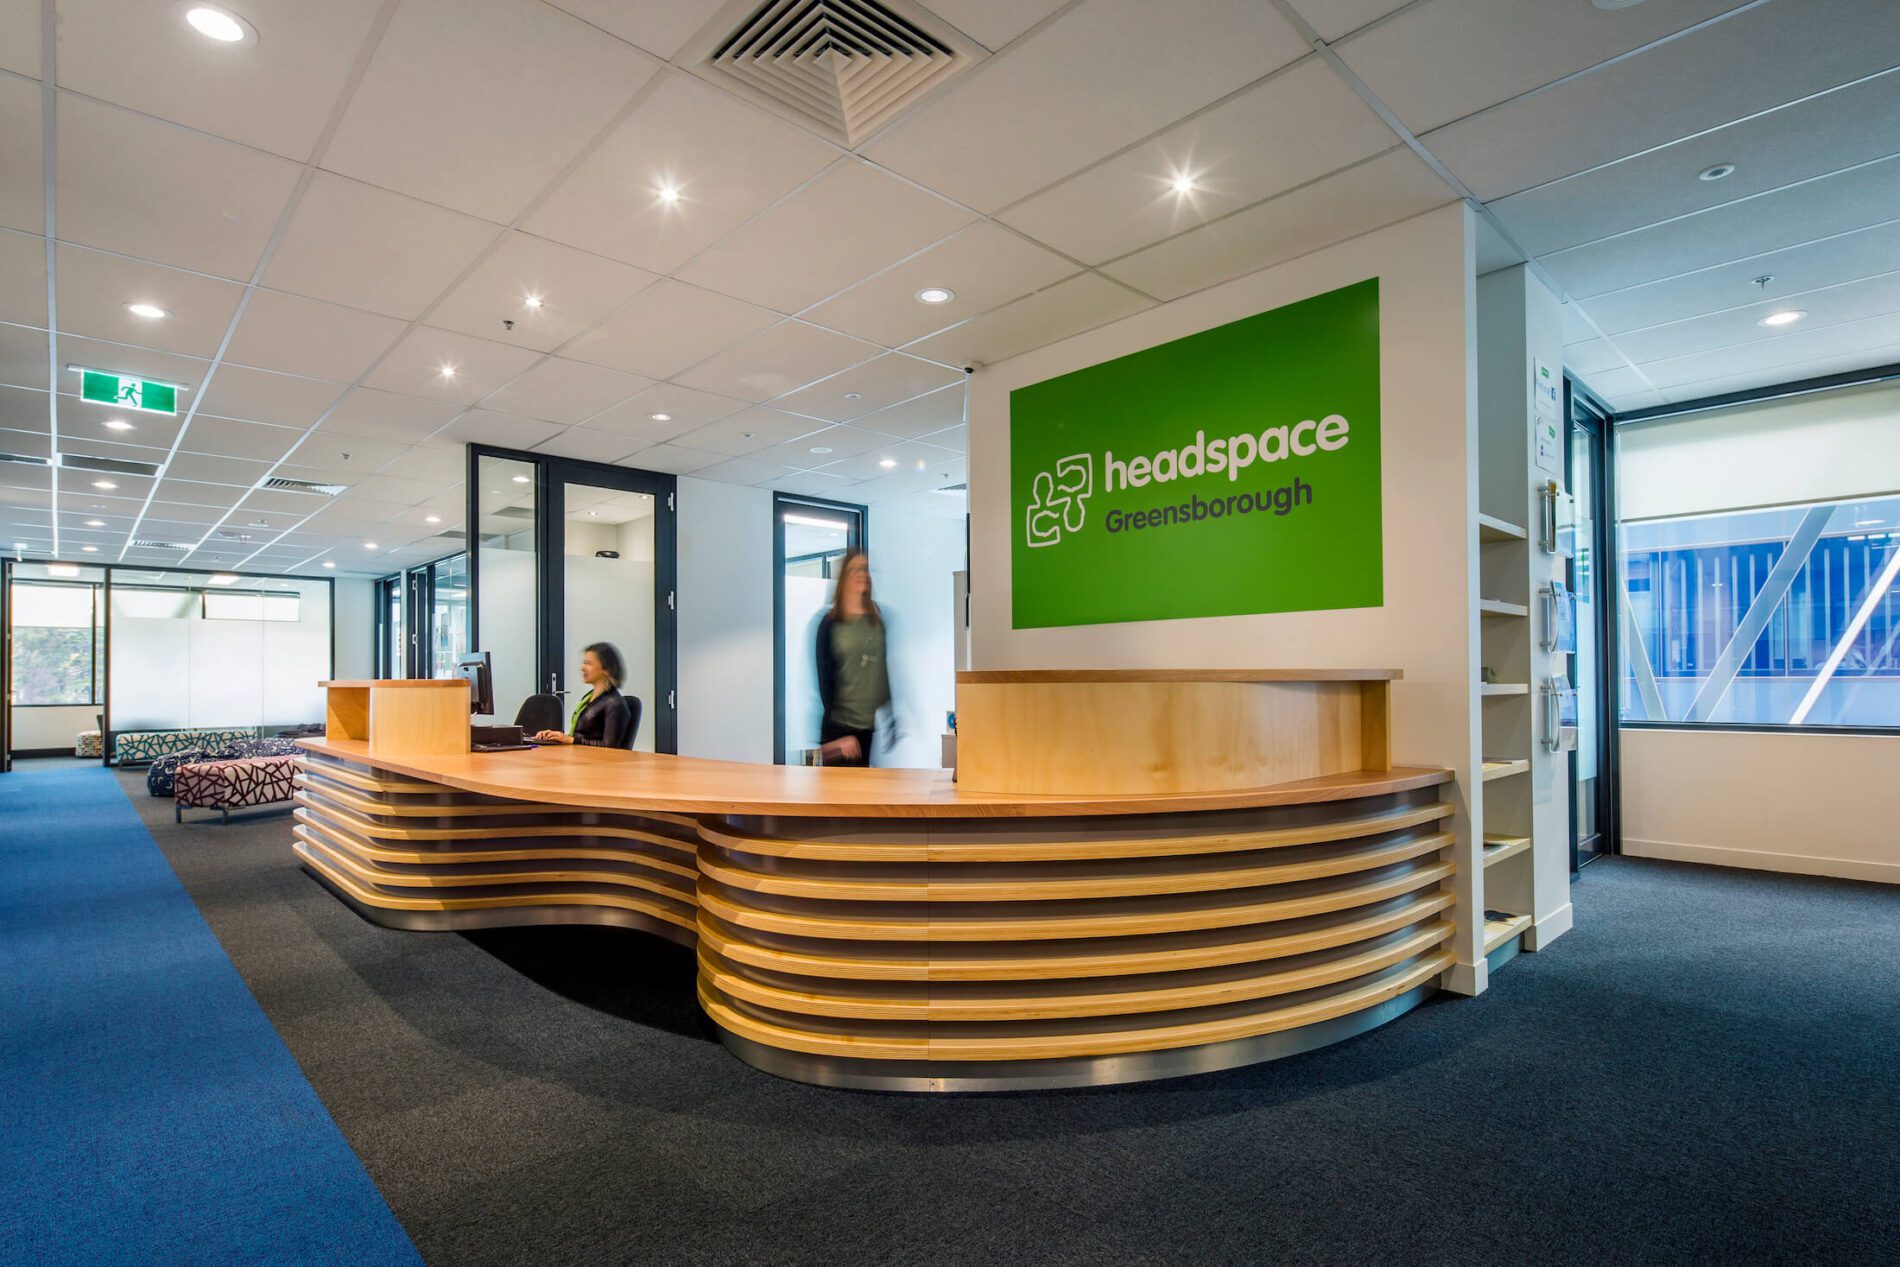 Reception desk with ribbed timber detail, green sign behind desk showing "headspace Greensborough"